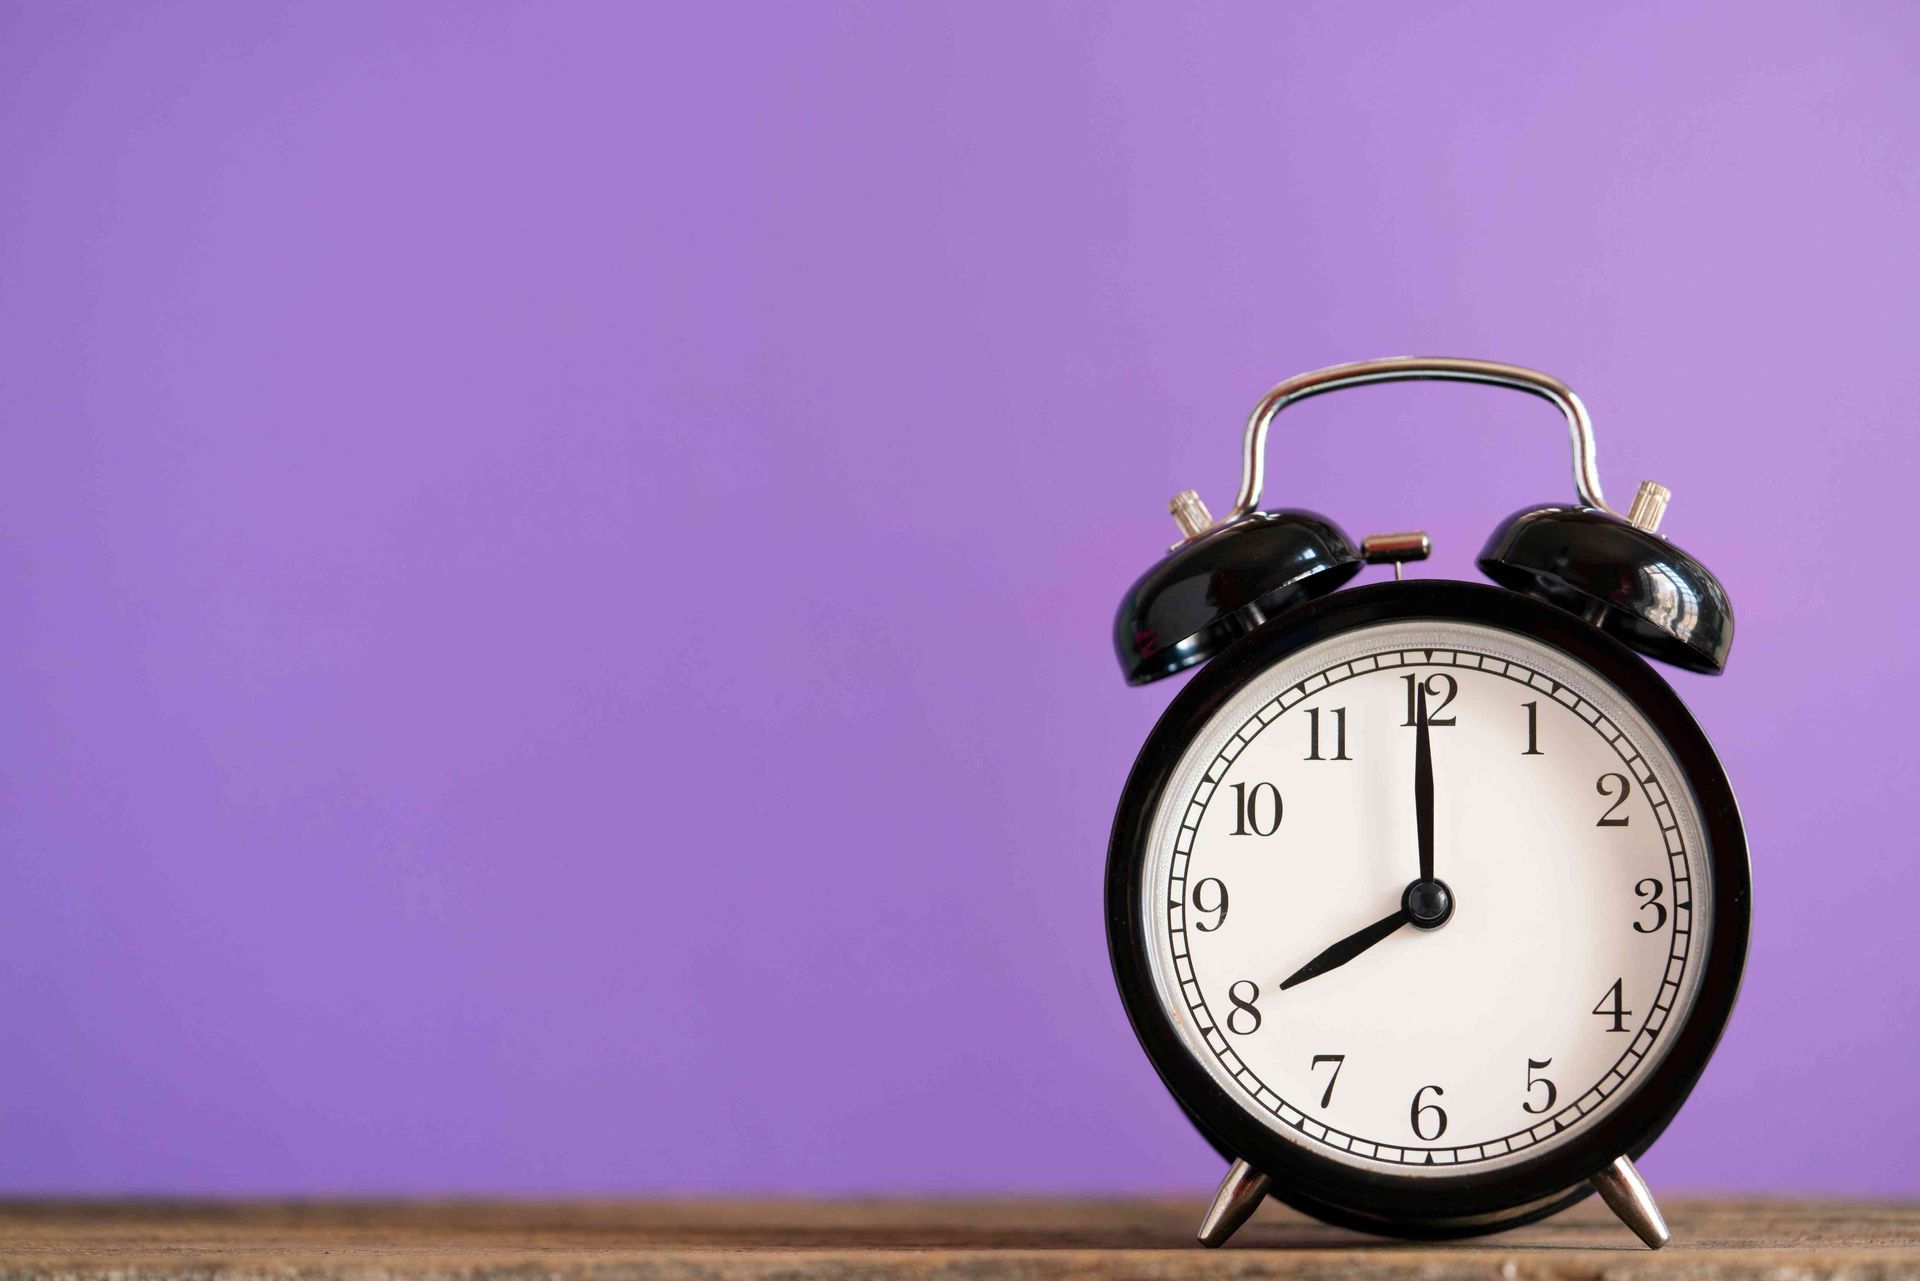 A clock in front of a purple background